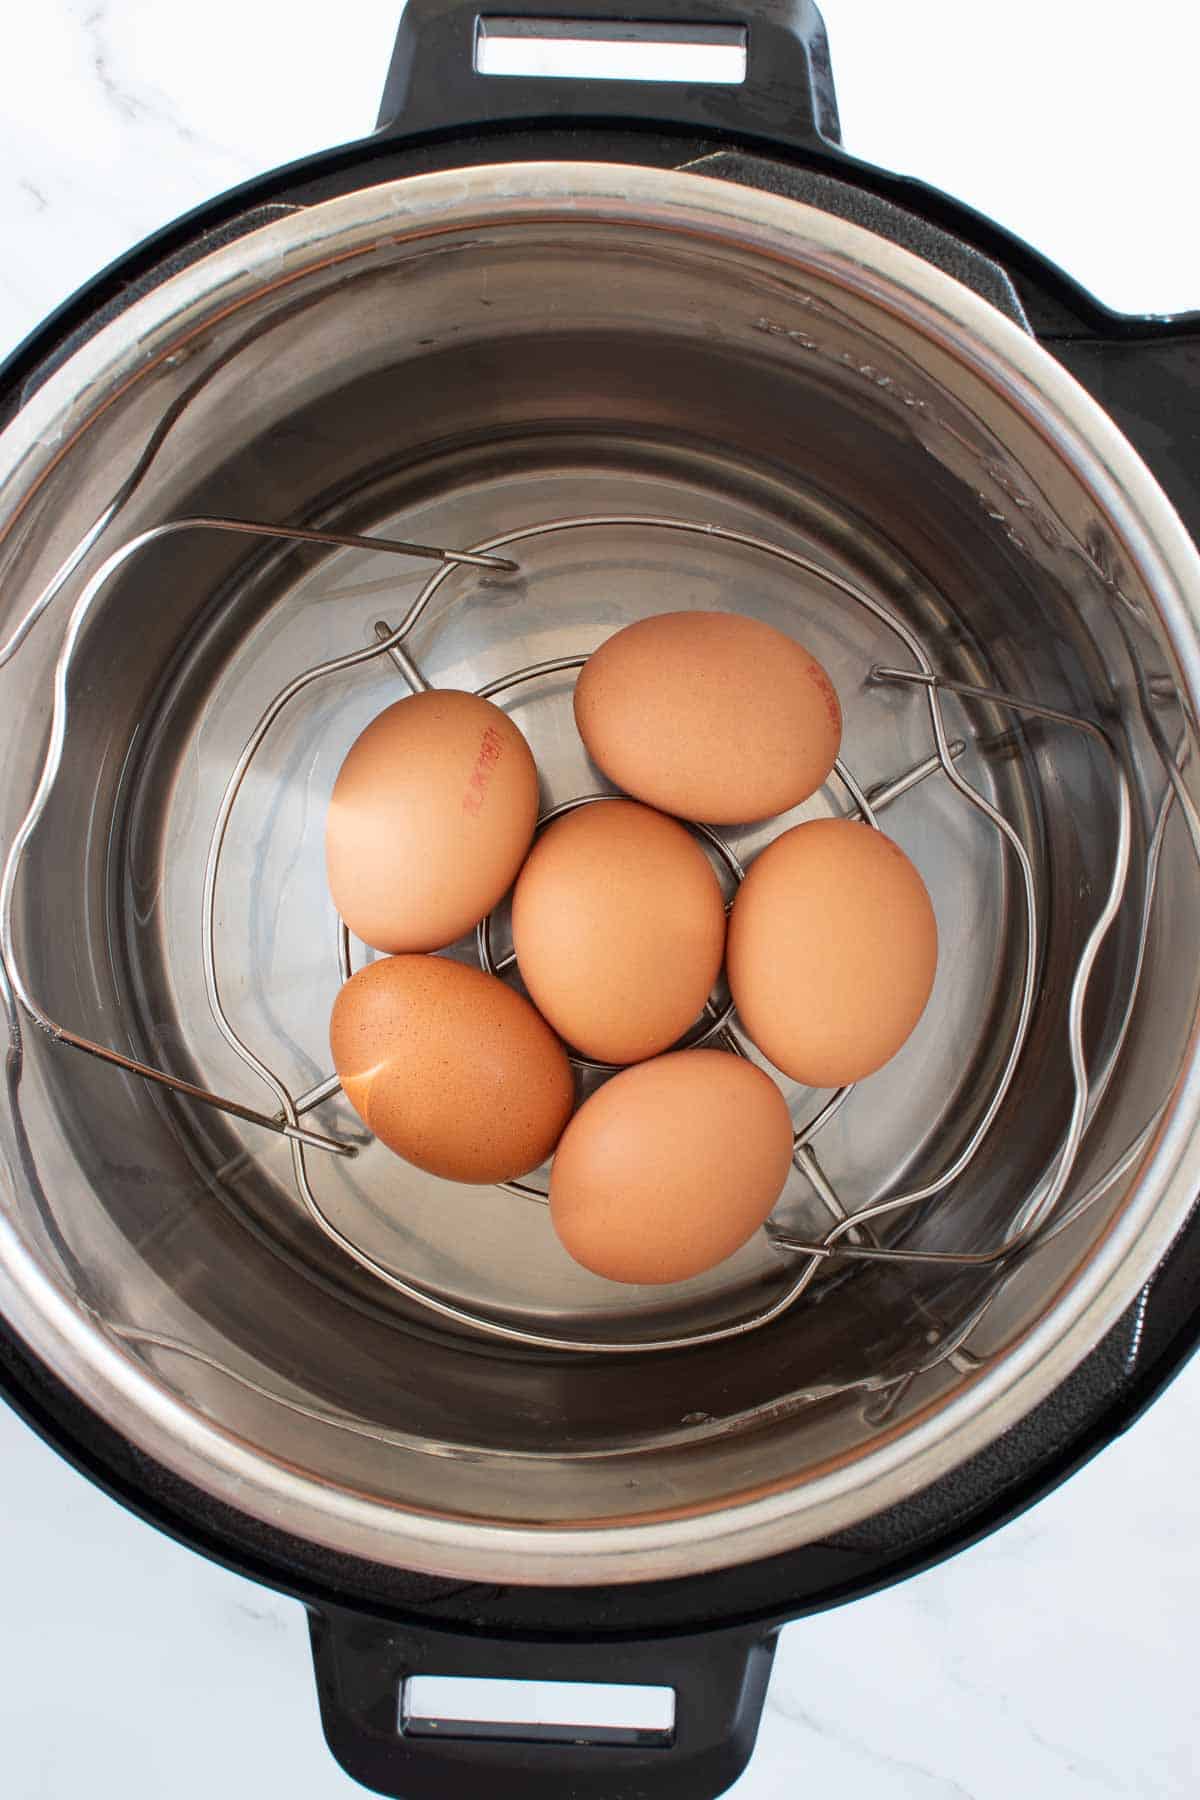 Eggs in an Instant Pot.